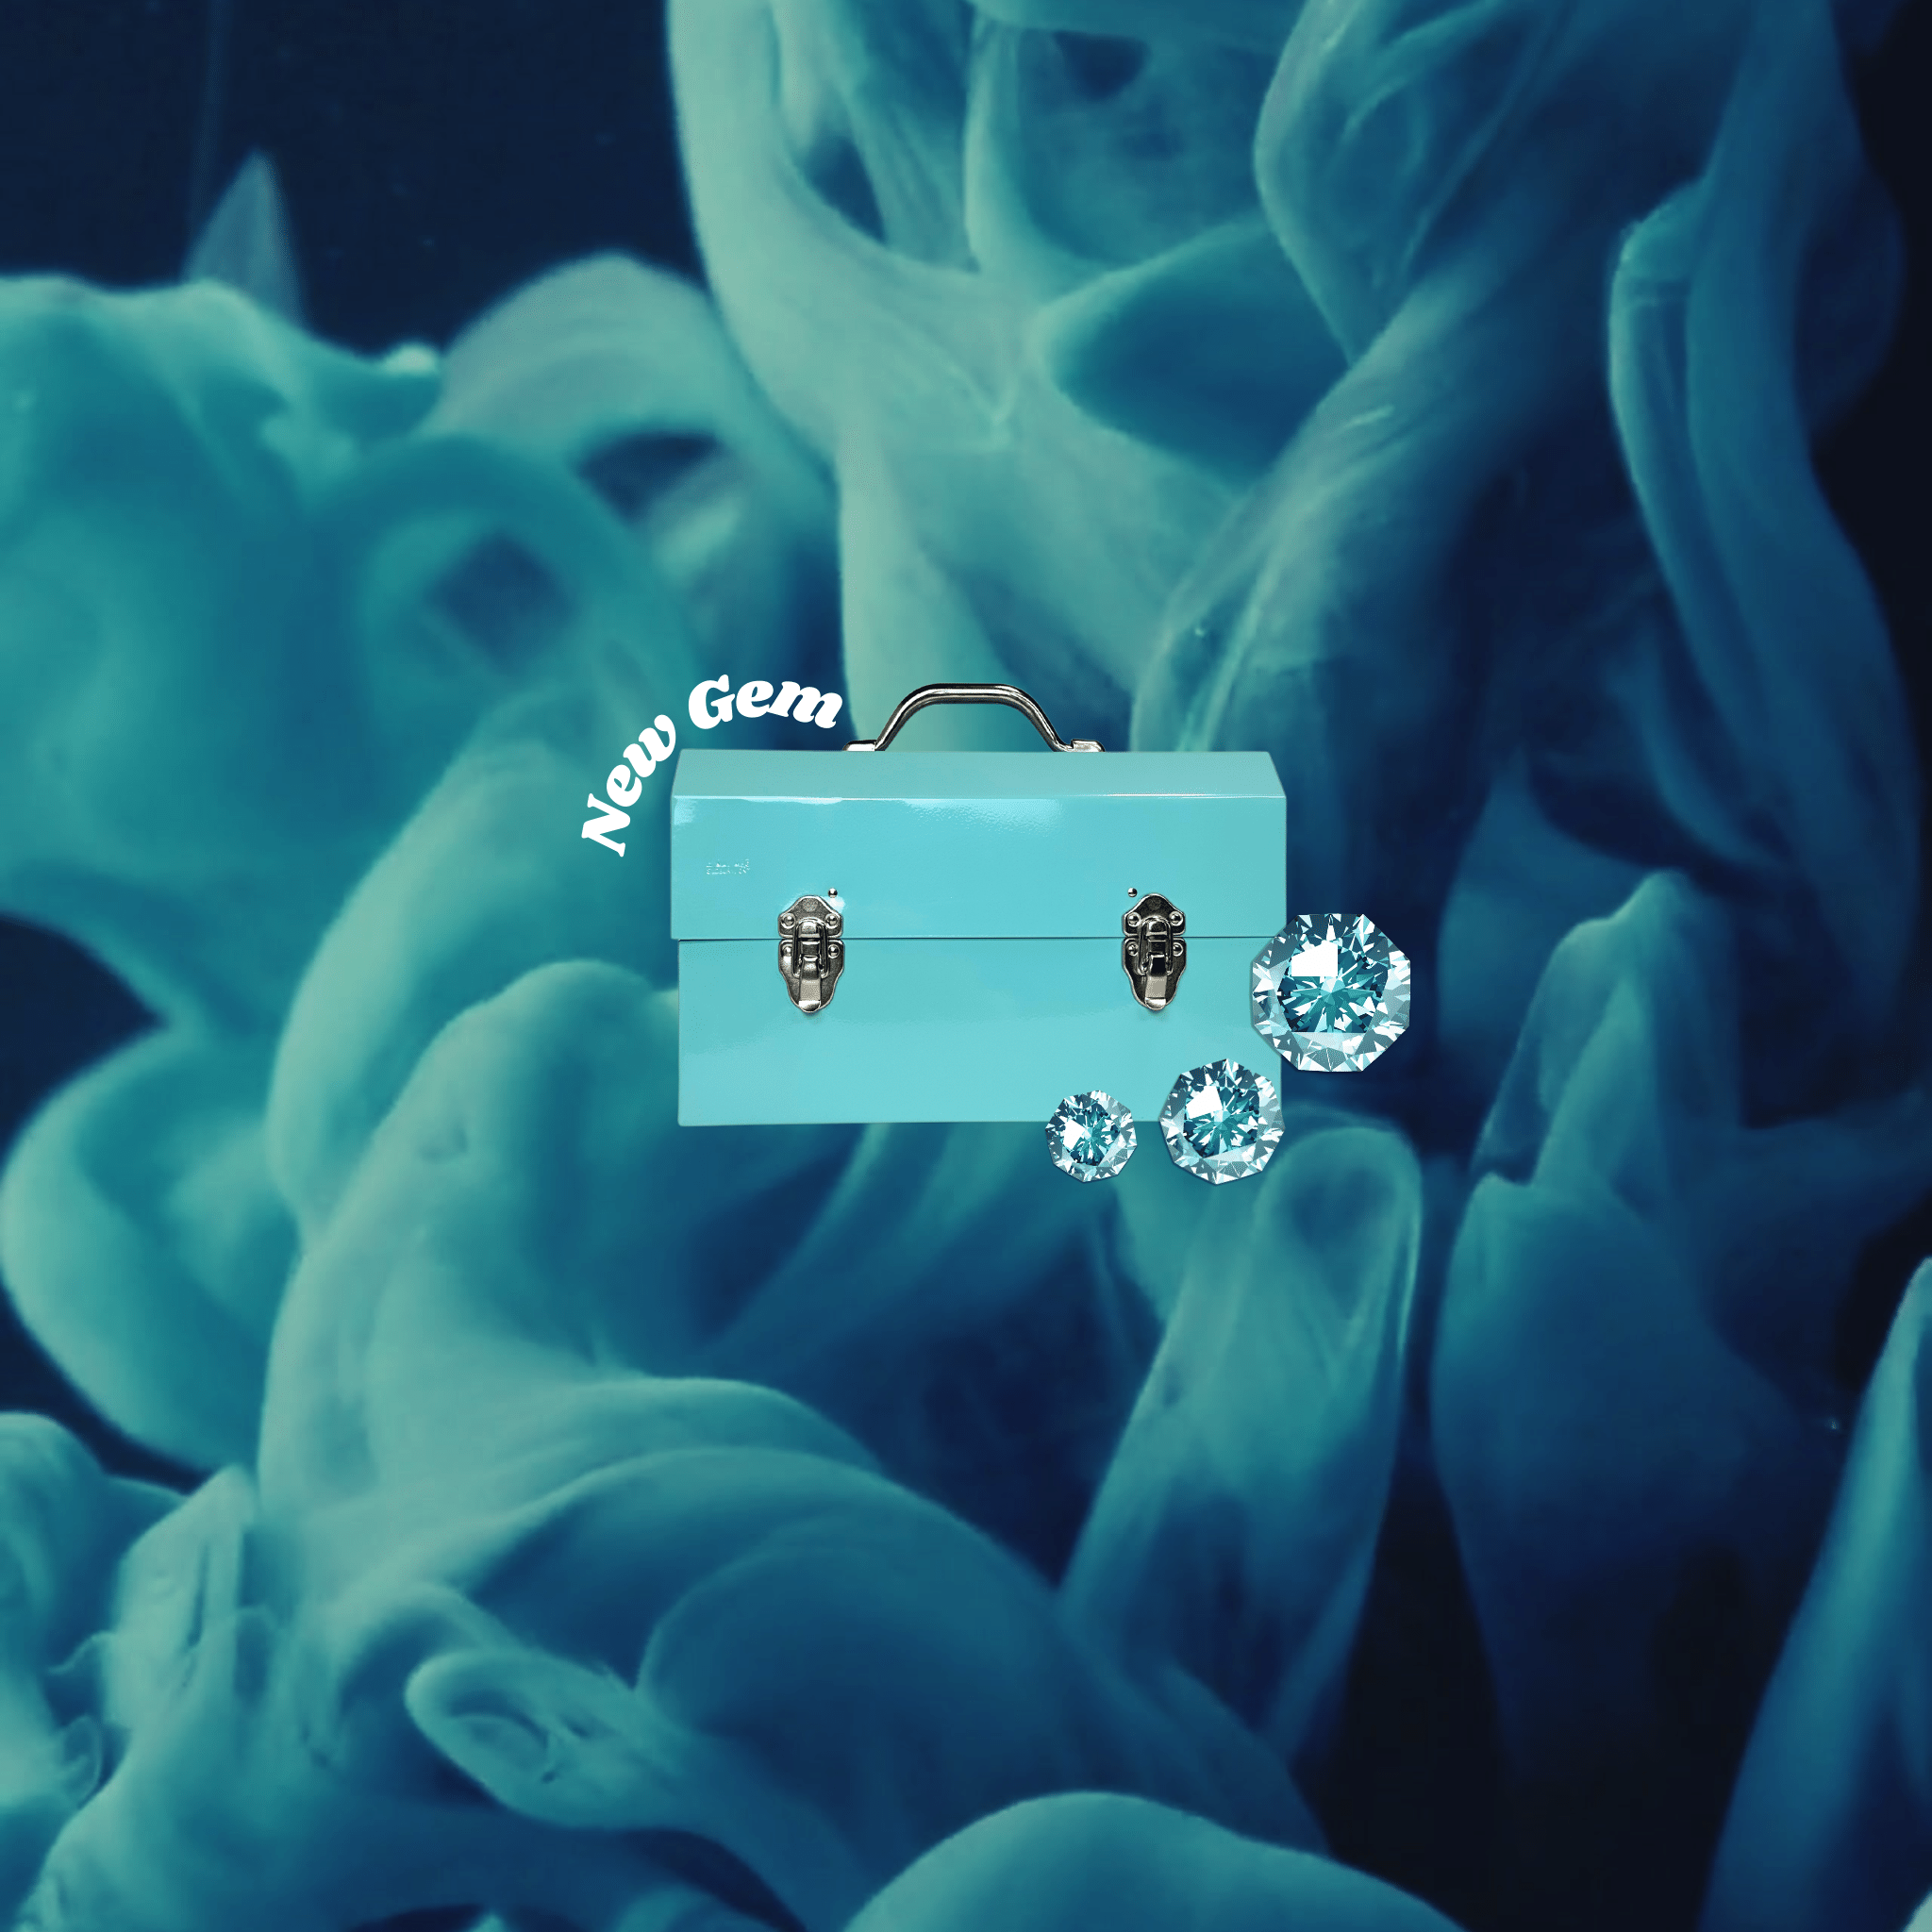 L. May miners aluminum lunchbox powder coated in colour teal for the gem collection representing the aquamarine gem